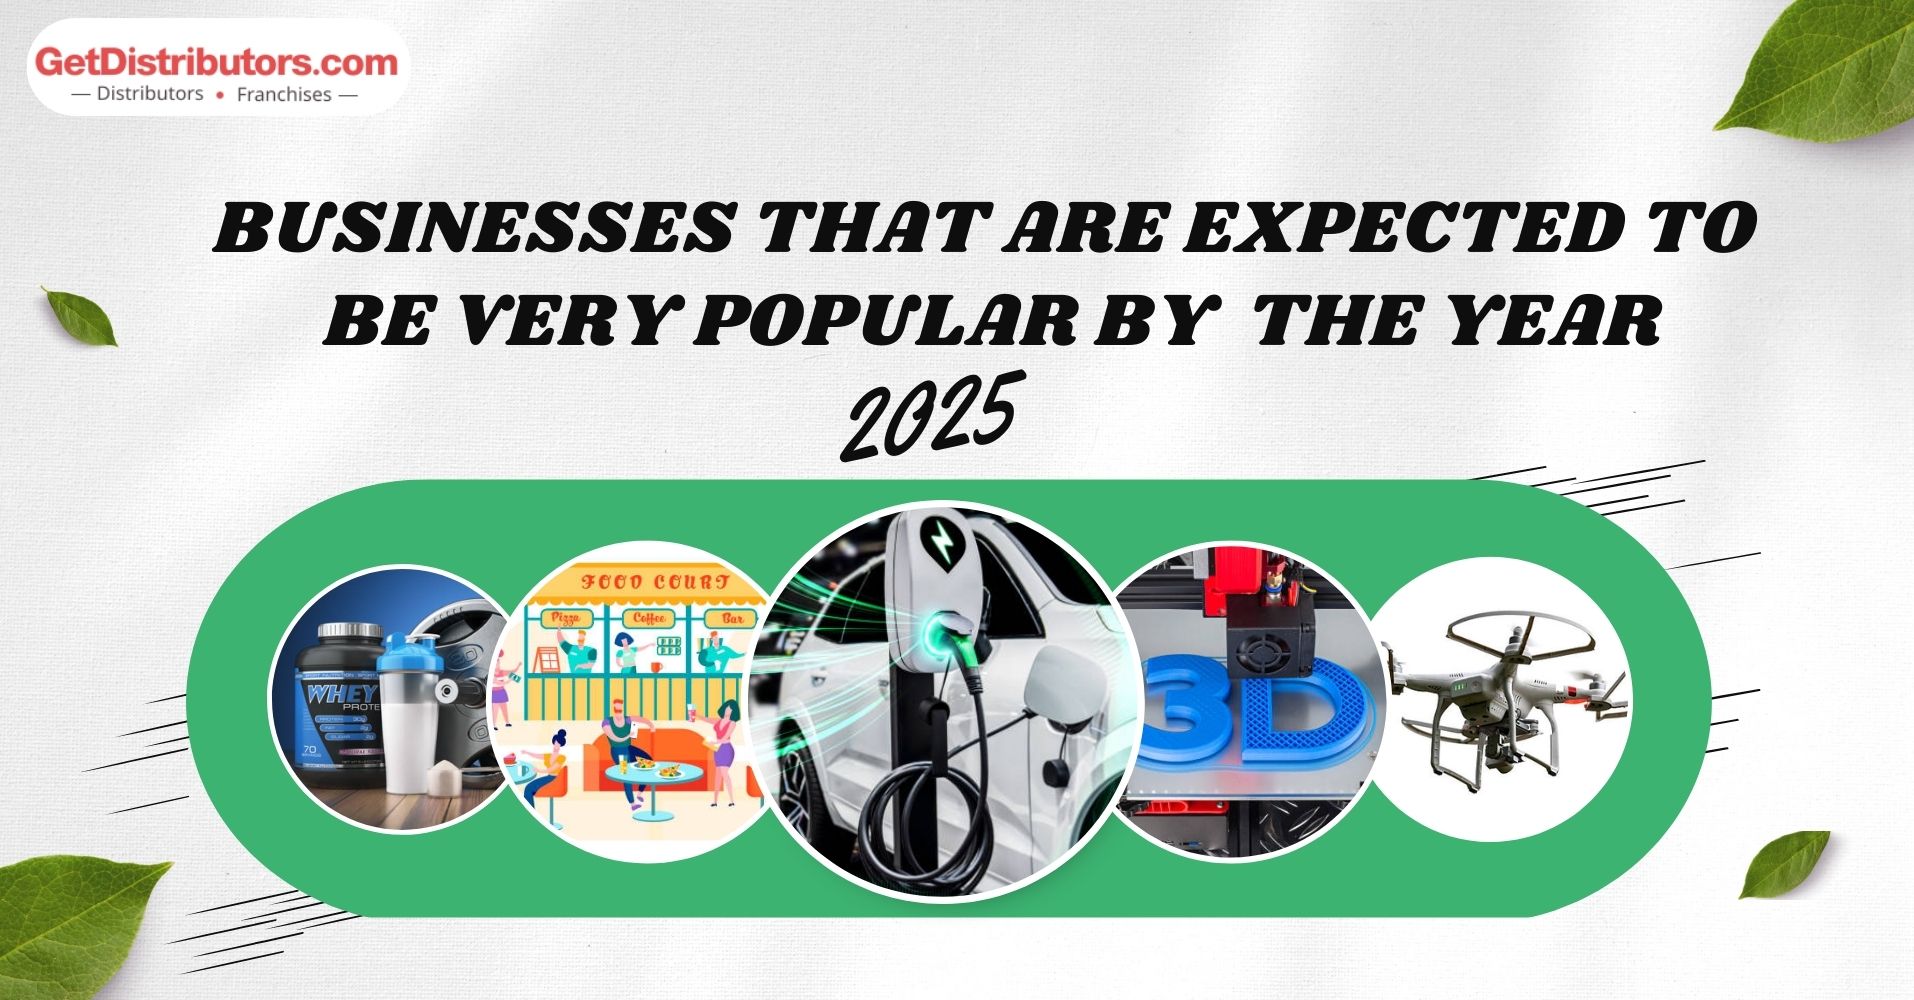 Businesses that are expected to be very popular by the year 2025